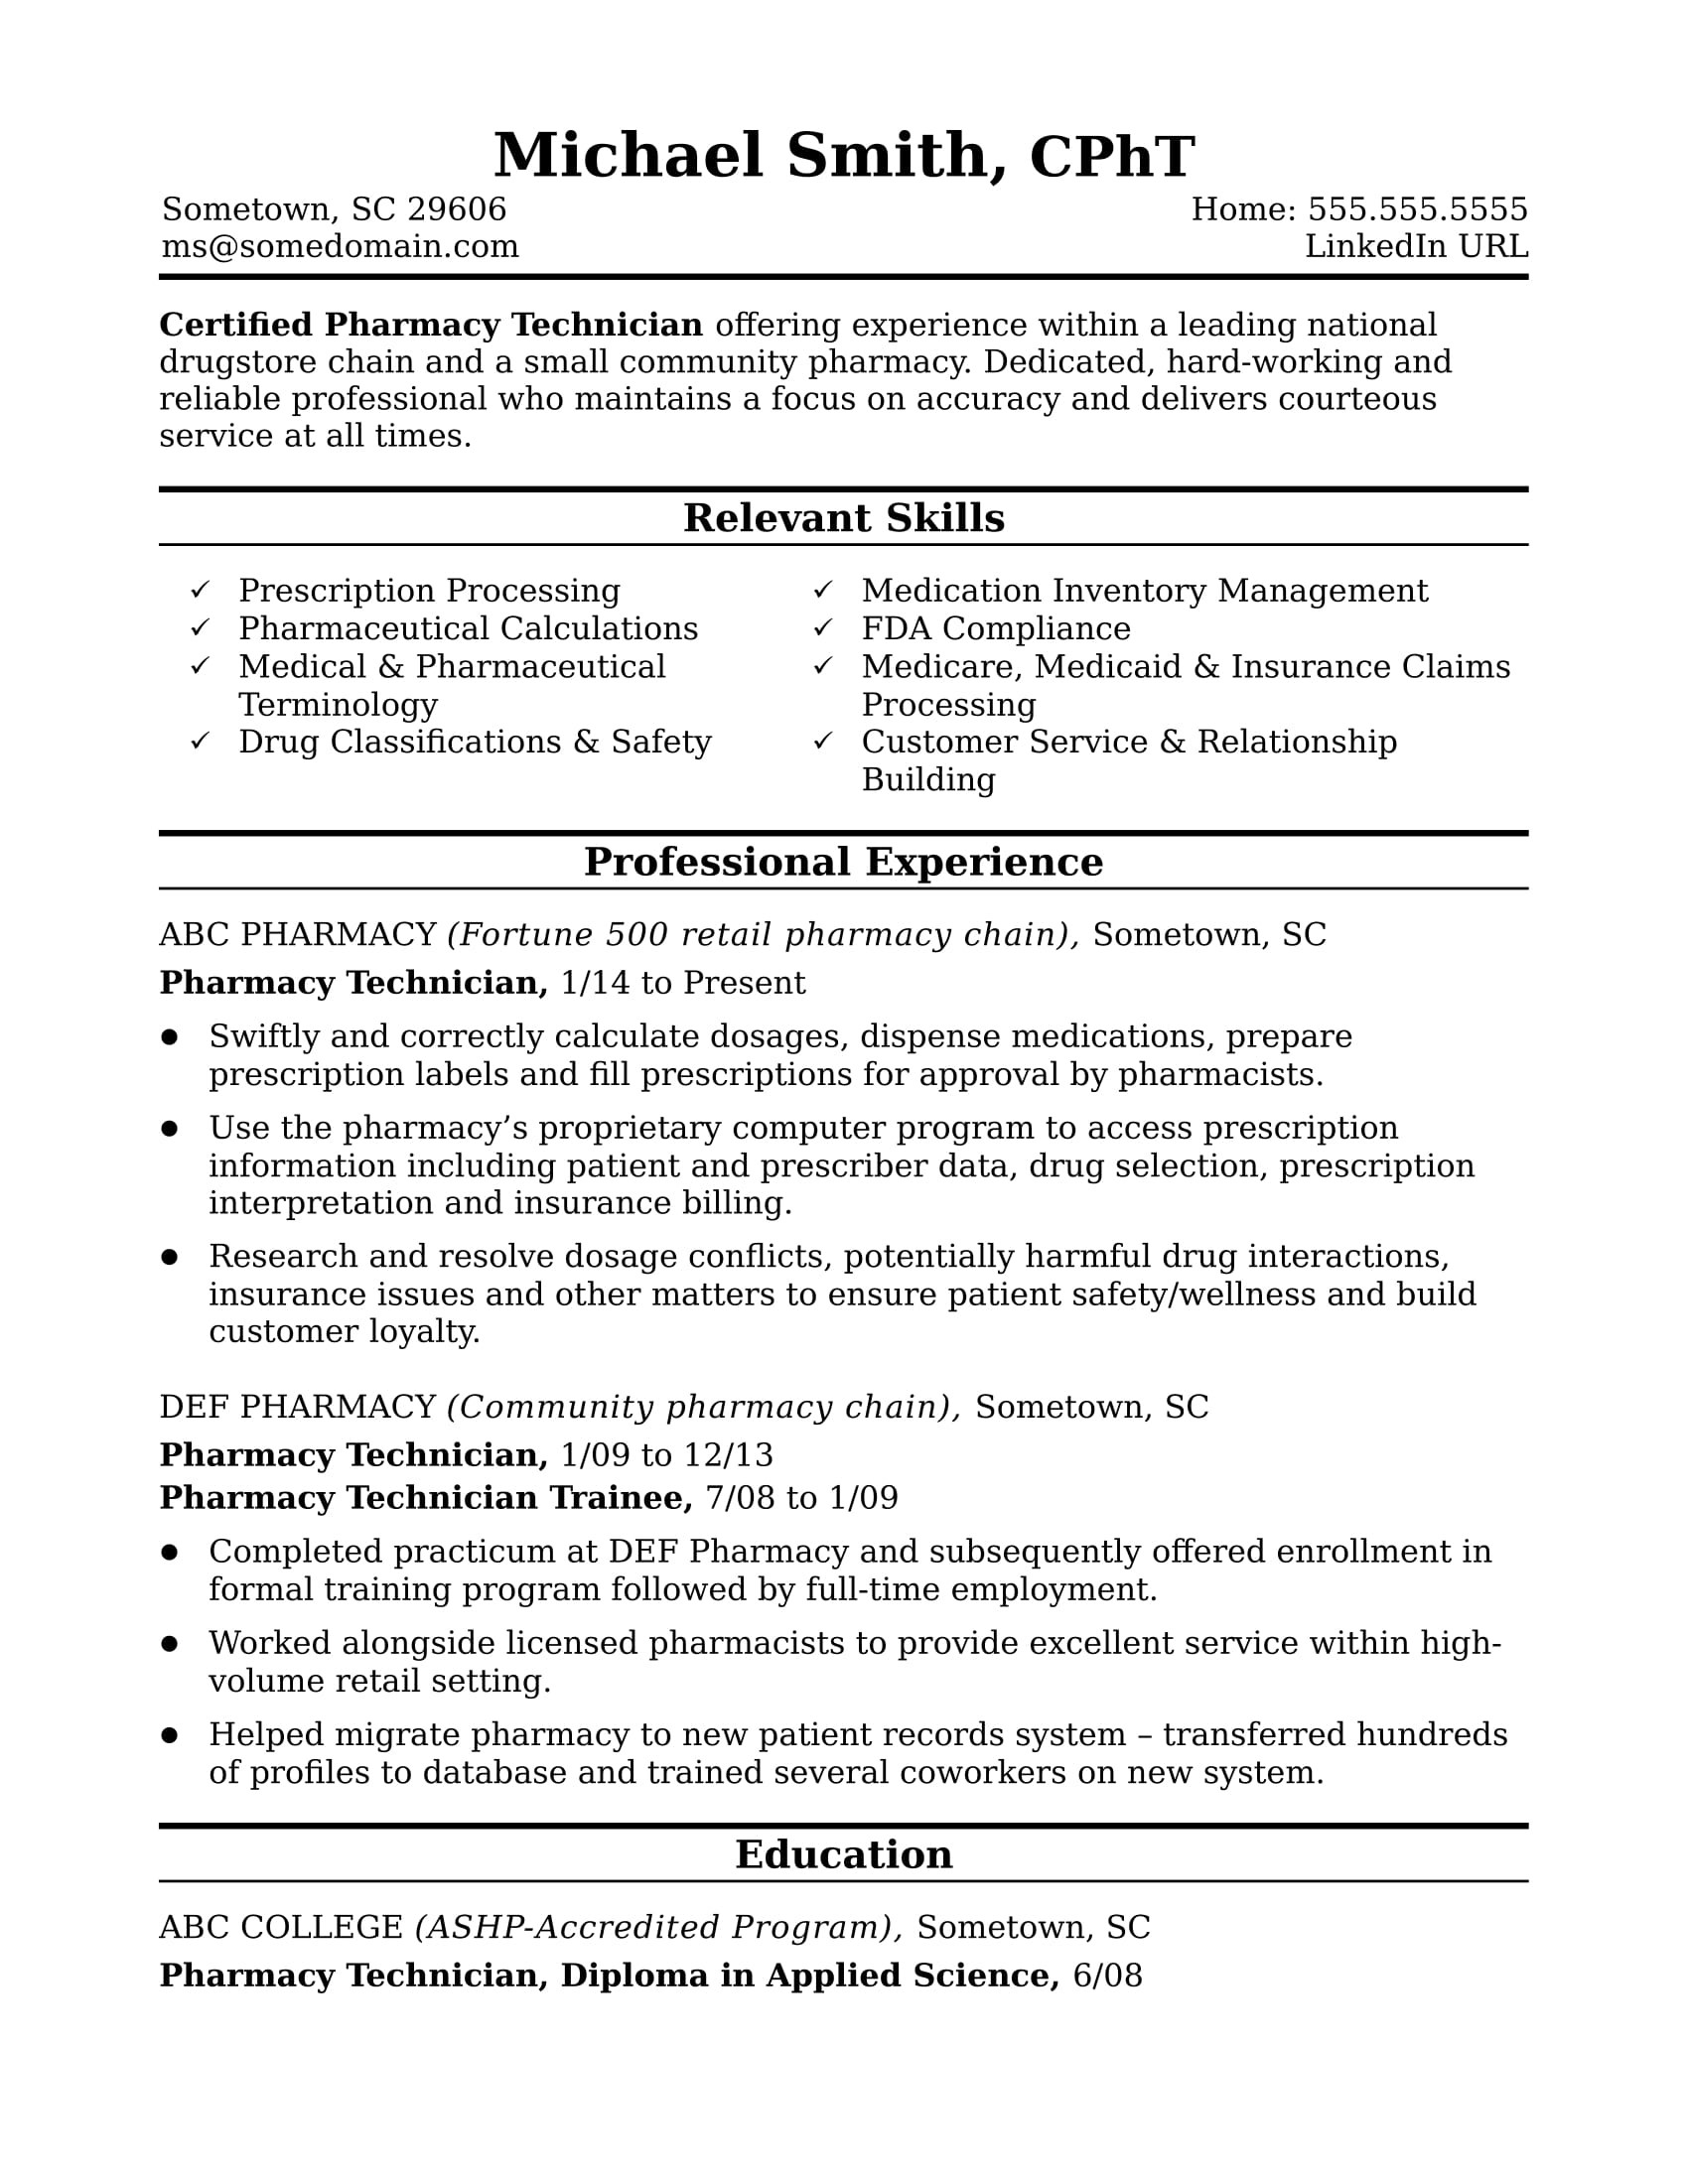 Sample Resume for Pharmacy assistant without Experience Midlevel Pharmacy Technician Resume Sample Monster.com